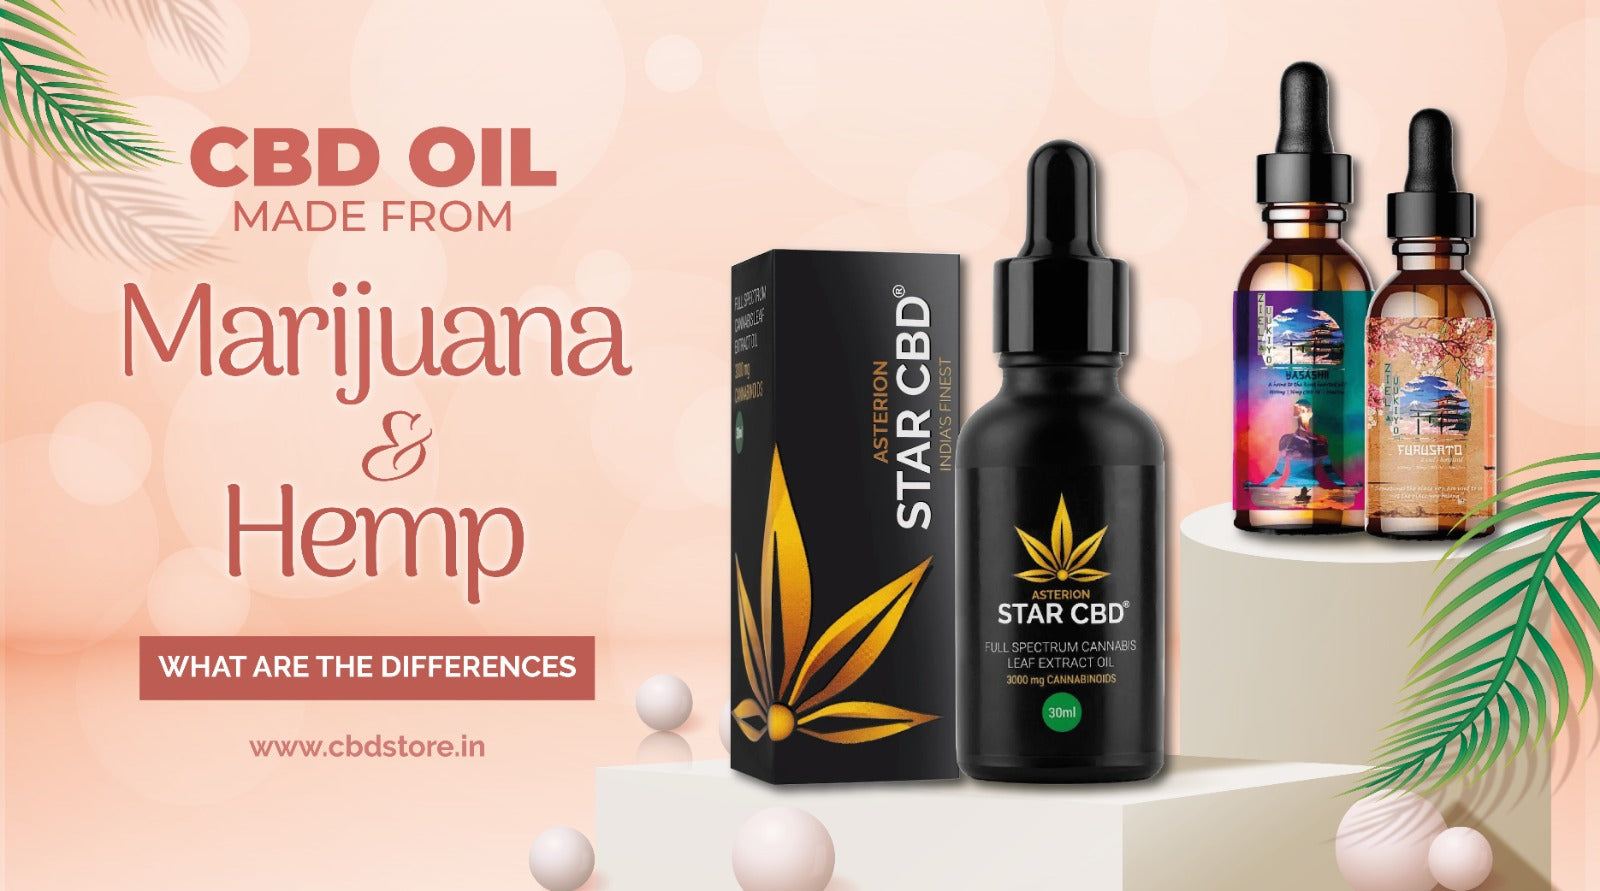 CBD Oil Made from Marijuana and Hemp: What Are the Differences